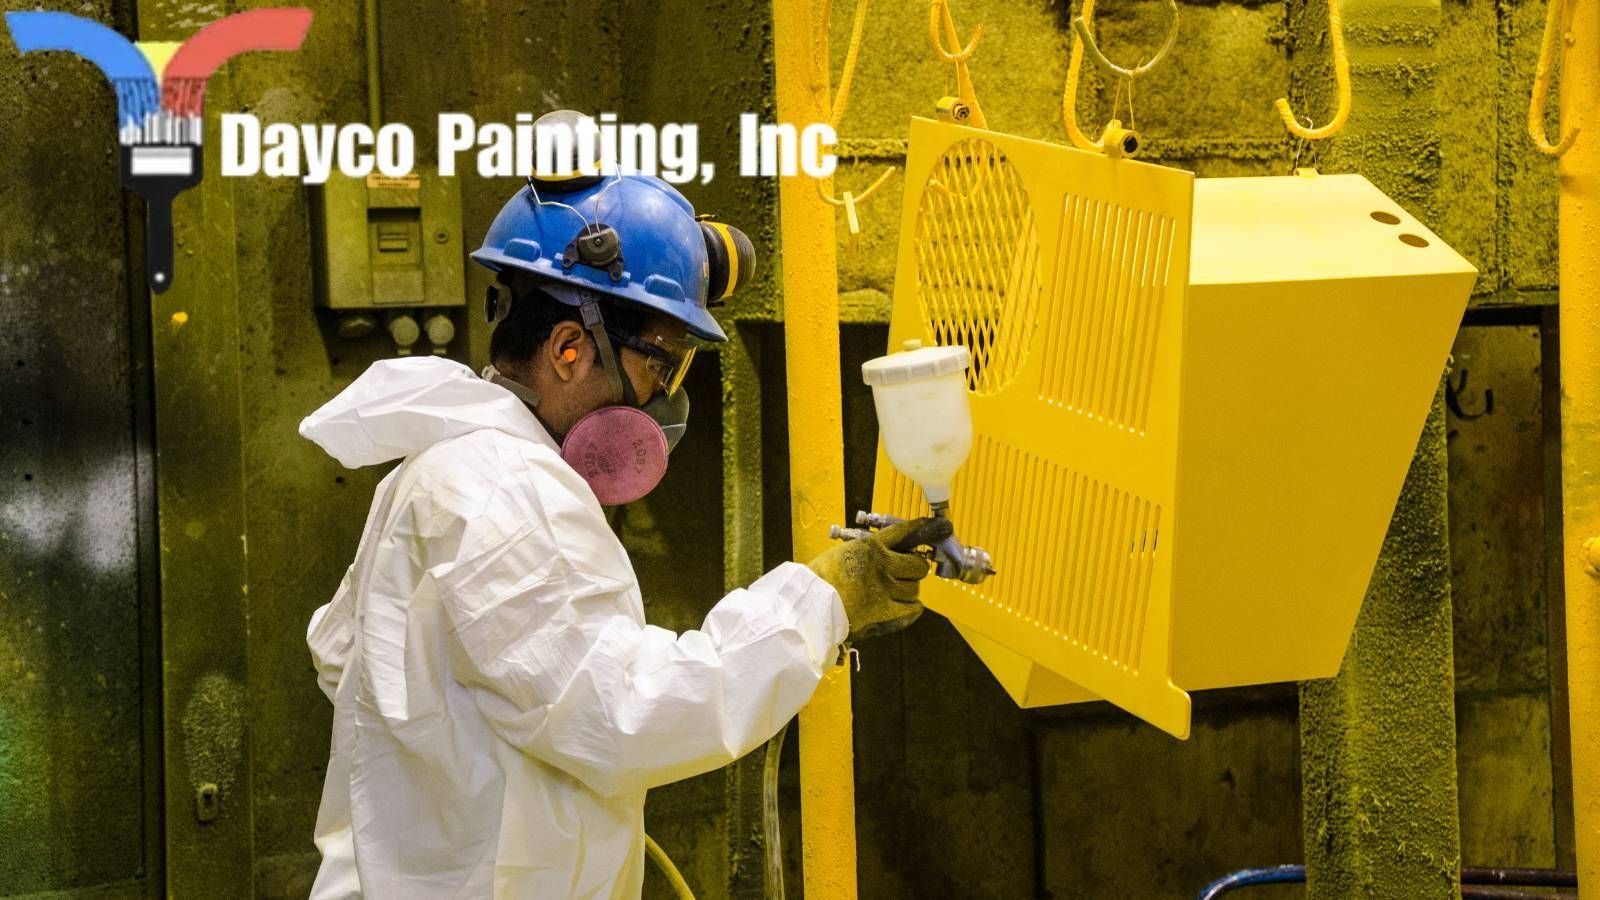 A hired painter wearing a hard hat is spray painting a yellow wall .